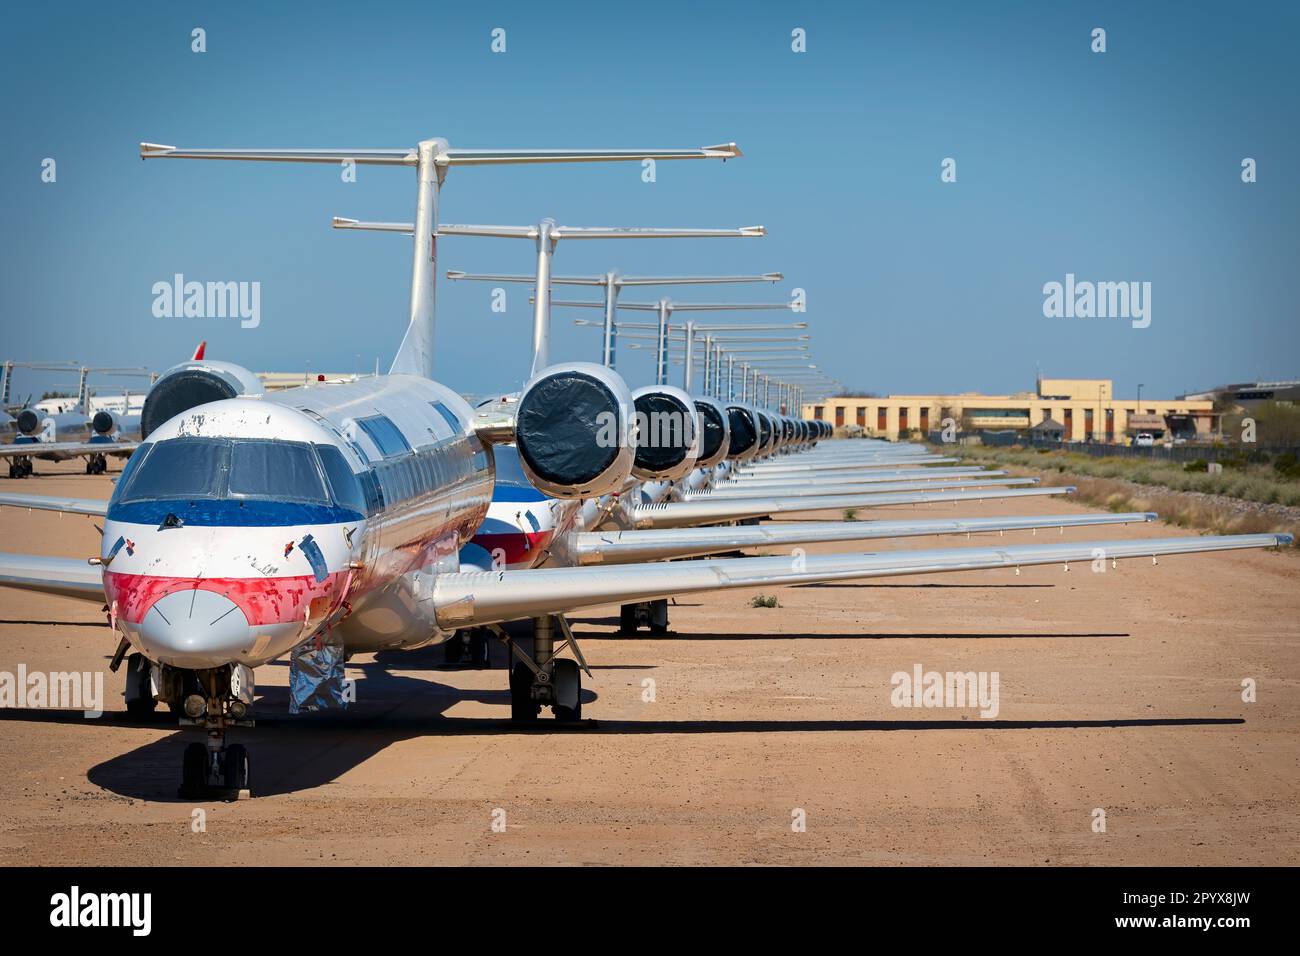 The Pinal County Airpark in Marana, Arizona, functions as a 'boneyard' for civilian commercial aircraft as well as airliner storage, reconfiguration, Stock Photo